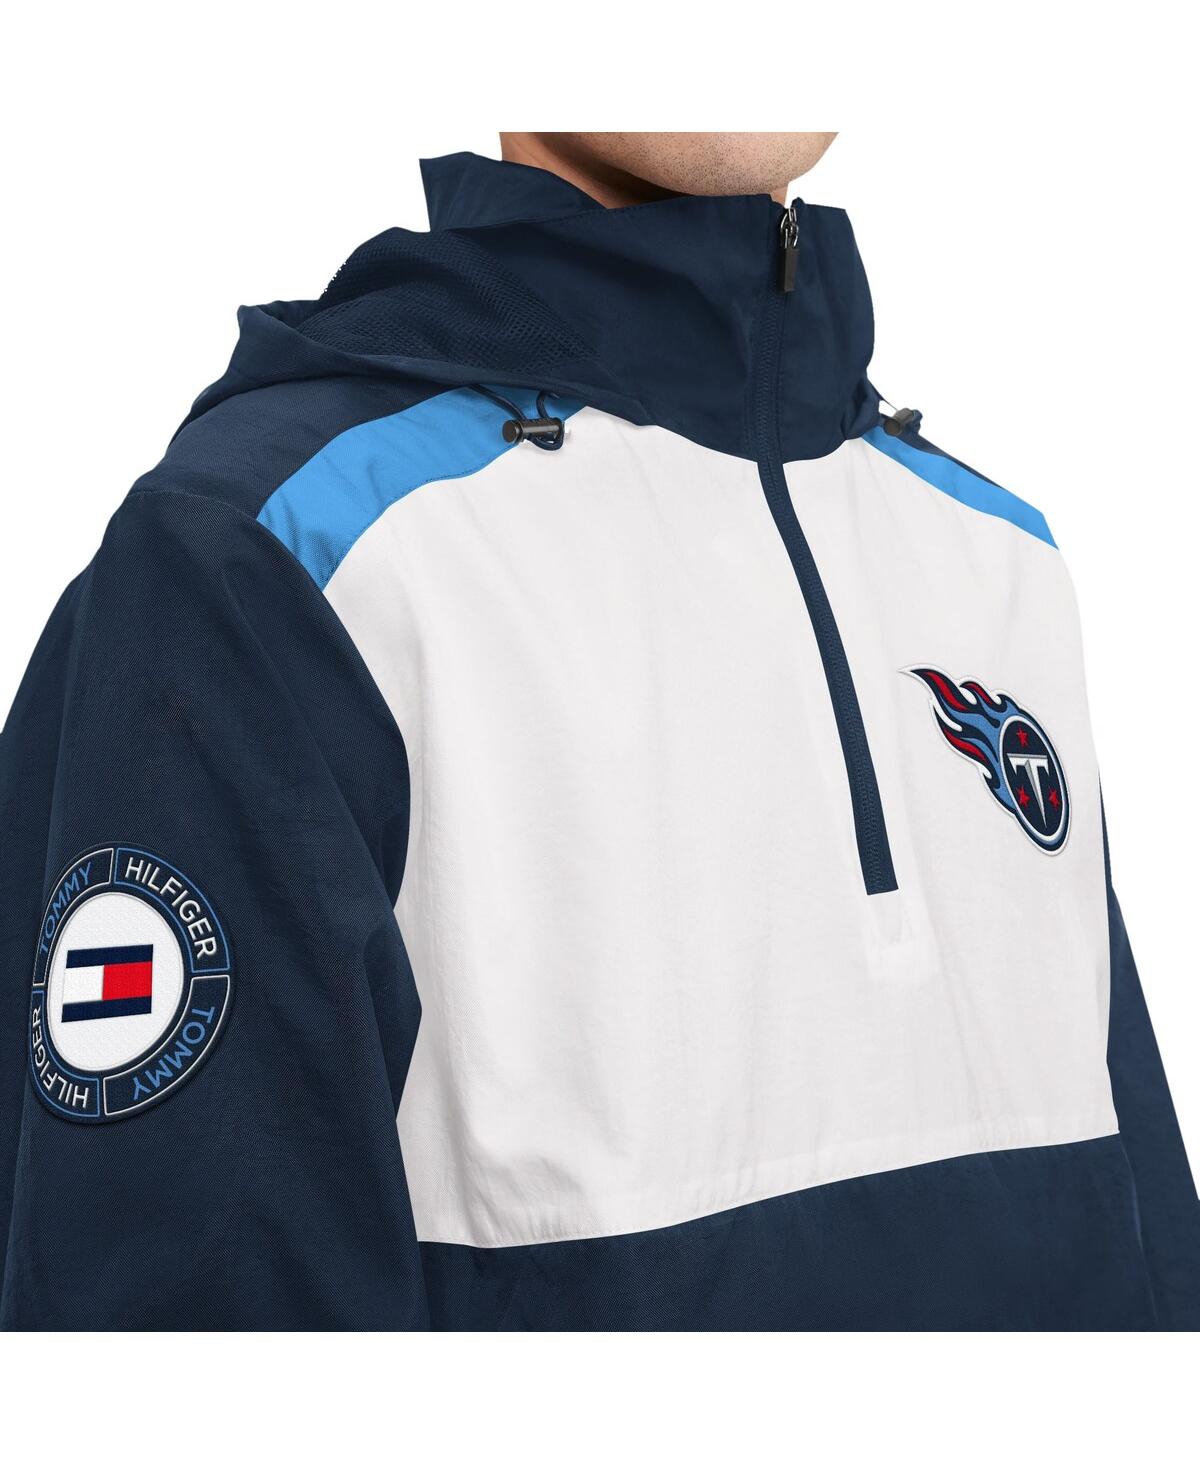 Shop Tommy Hilfiger Men's  Navy, White Tennessee Titans Carter Half-zip Hooded Top In Navy,white